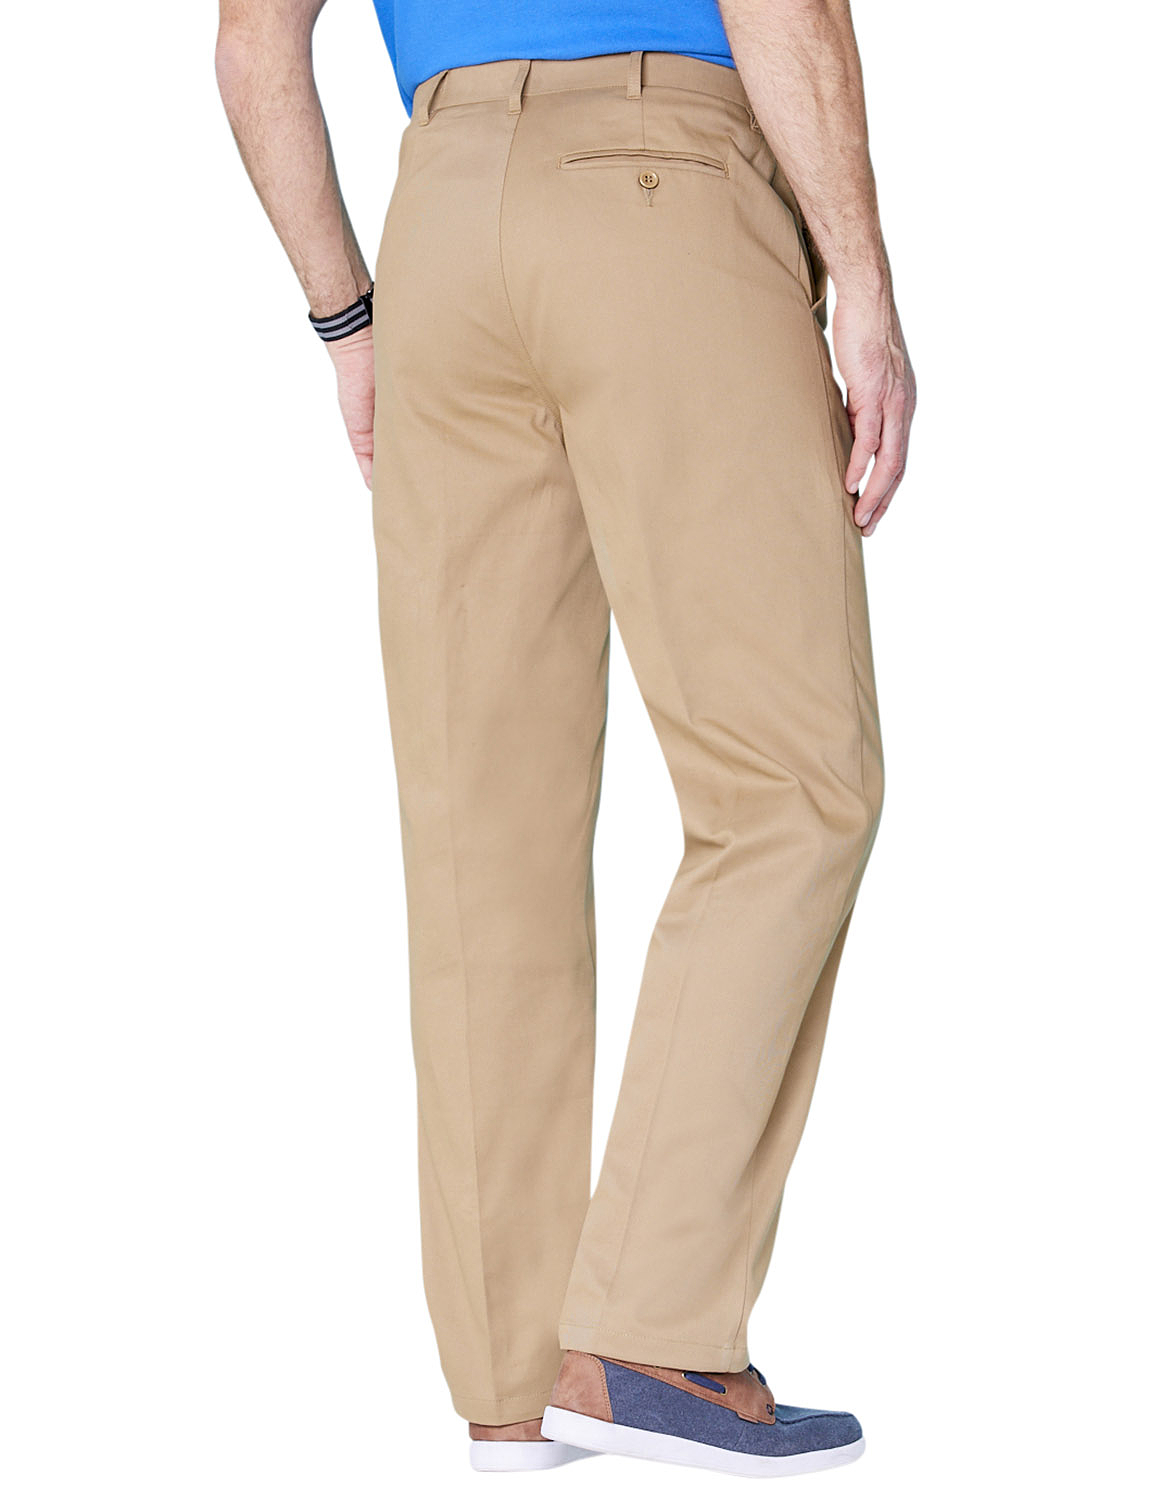 Travel Chino With Stretch Fabric And Adjustable Waist | Chums